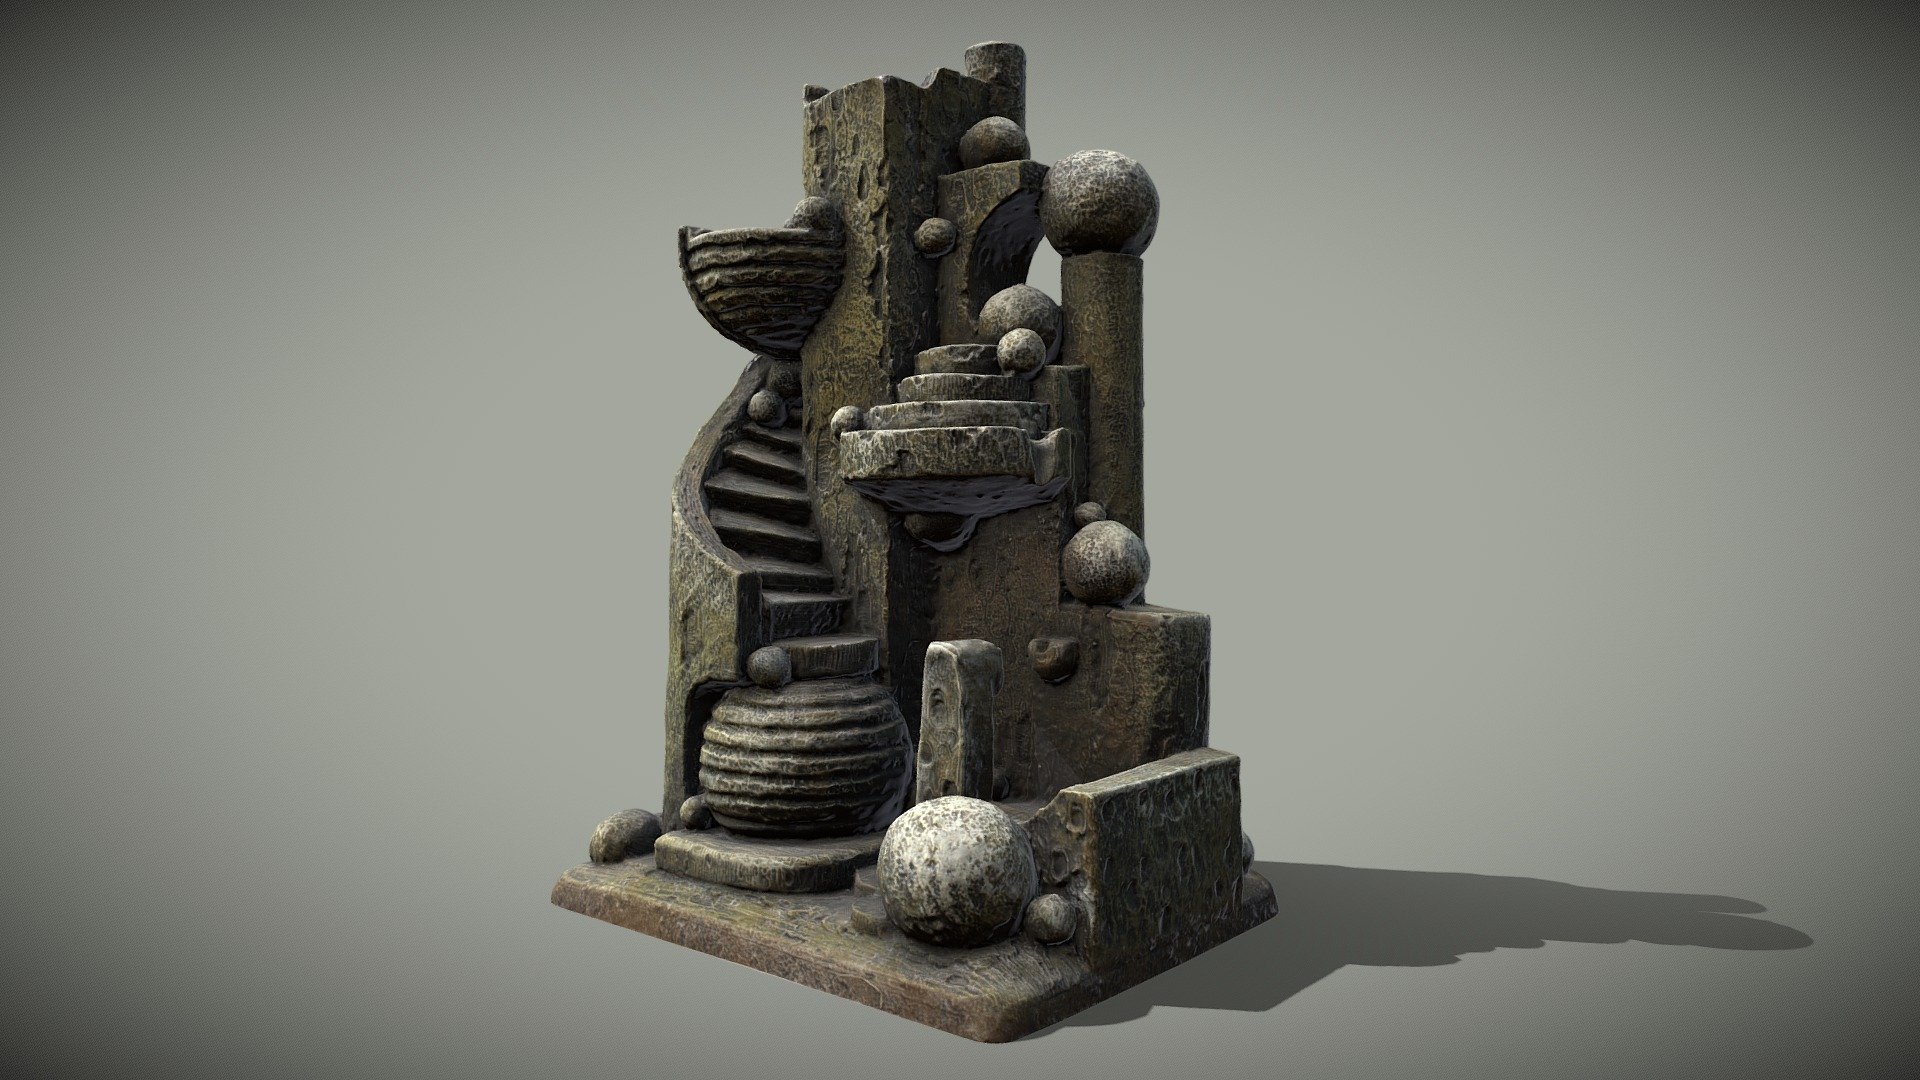 The model of the ancient fountain was scanned from real photographs. 3D reconstruction generated with photogrammetry software 3DF Zephyr processing 192 images (camera Canon EOS 60D). After generation, mesh was decimated to create model with less count of triangles. The model has 4k textures and 575.6k triangles. Lower part is closed with &ldquo;Fill Holes